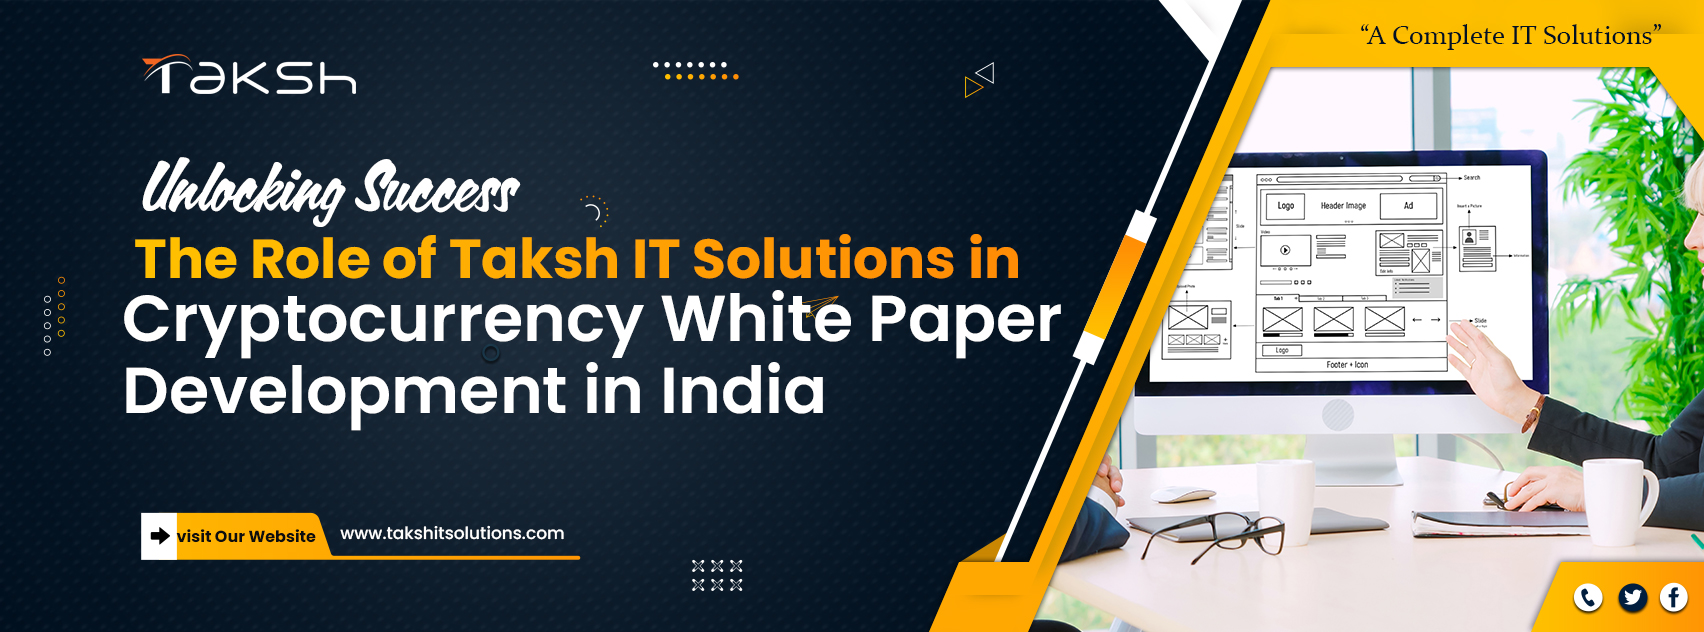 Cryptocurrency White Paper Development Company in India: Taksh IT Solutions Private Limited